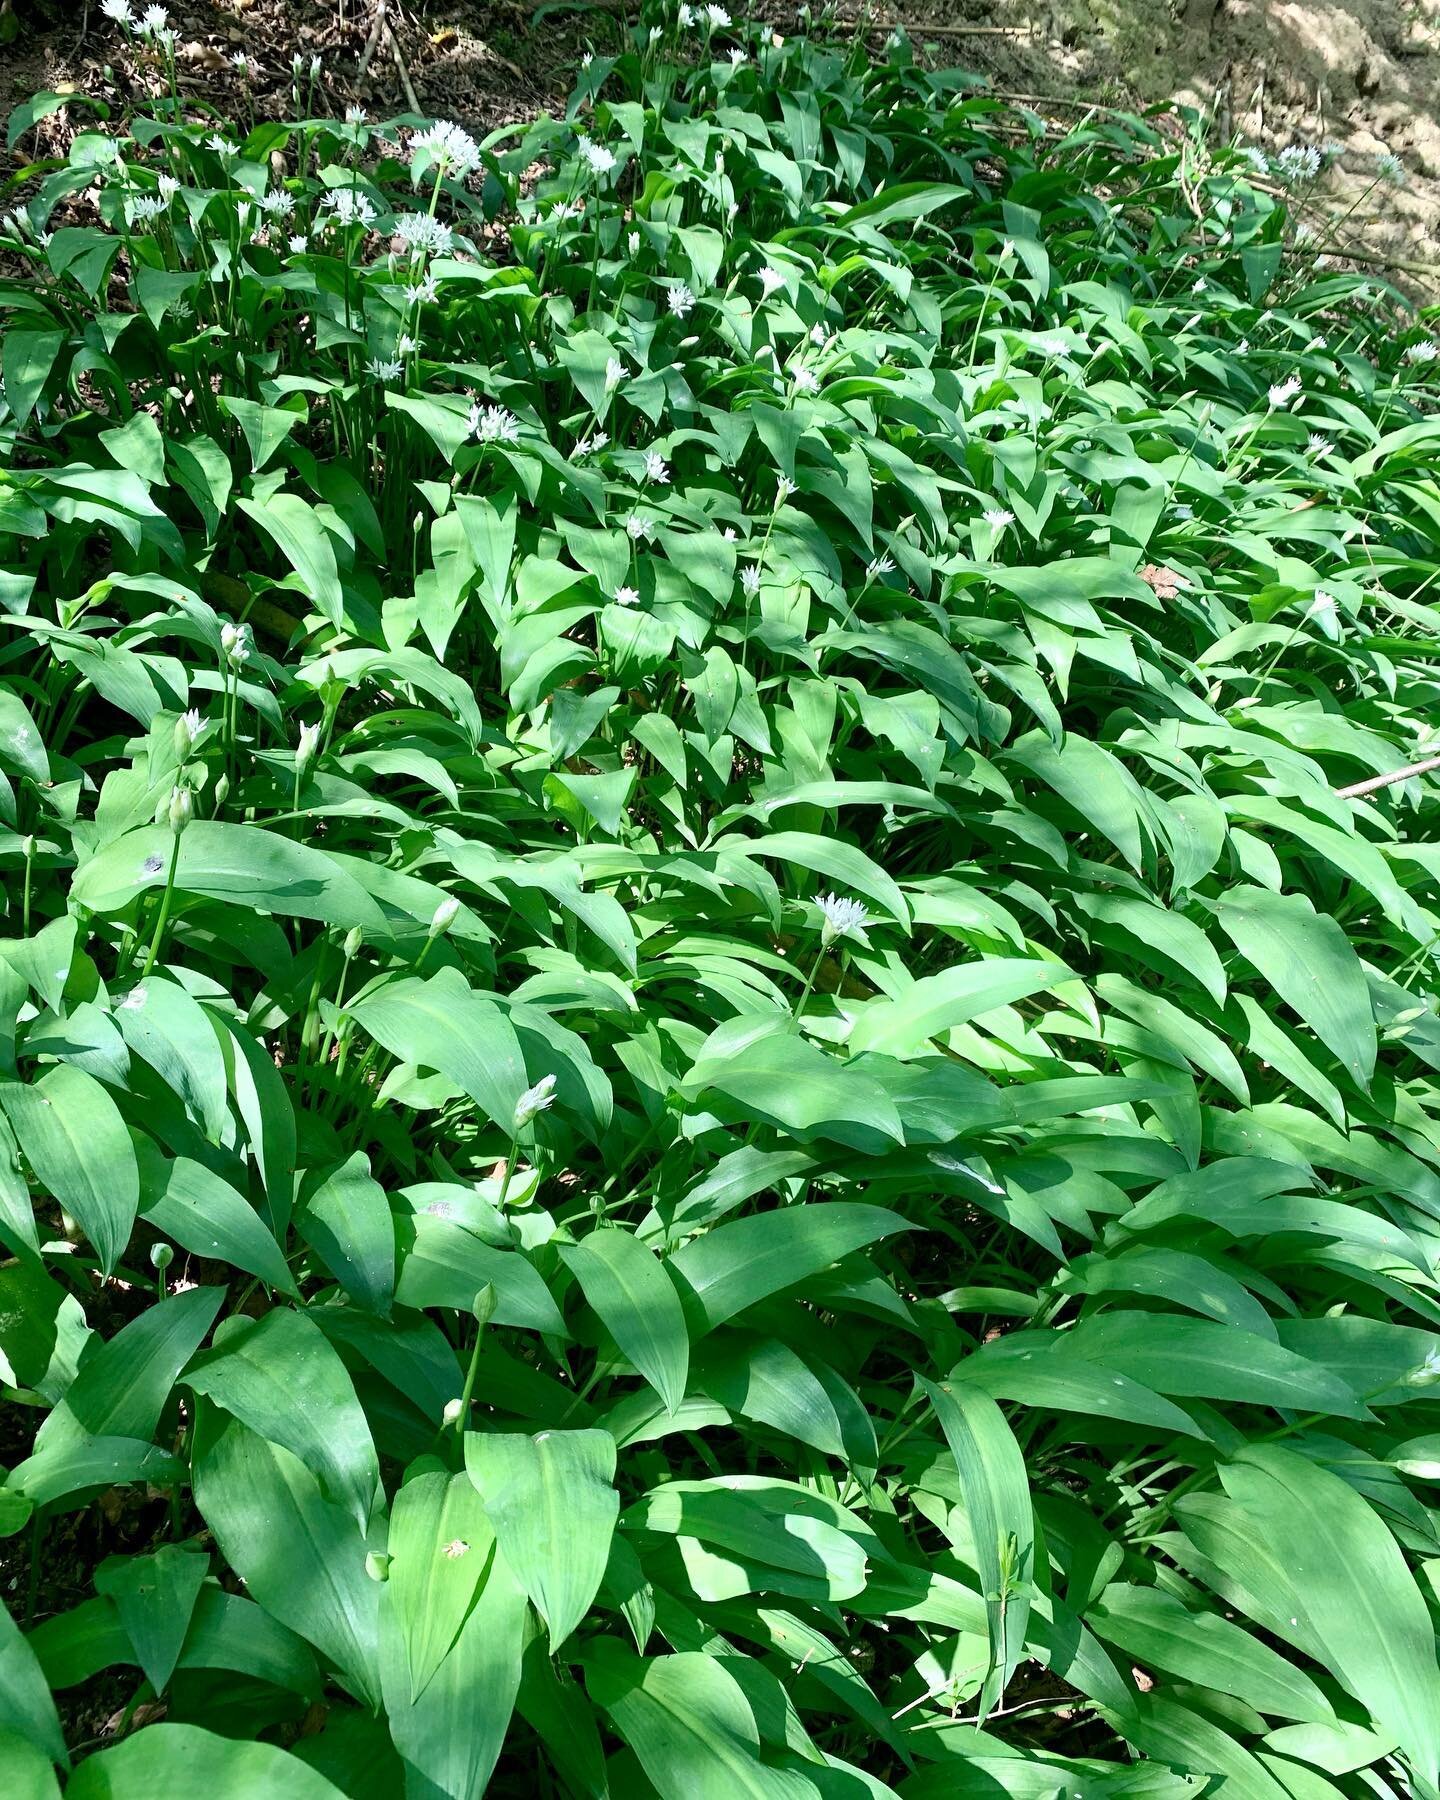 🍃 🧄 Wild Garlic 🧄 🍃 
Finally we are in wild garlic season, it is time to pop those wellies on and head out with scissors in hand. It can be found in damp and shady spots often carpeting woodland floors. 
You can eat both leaf and flower (perfect 